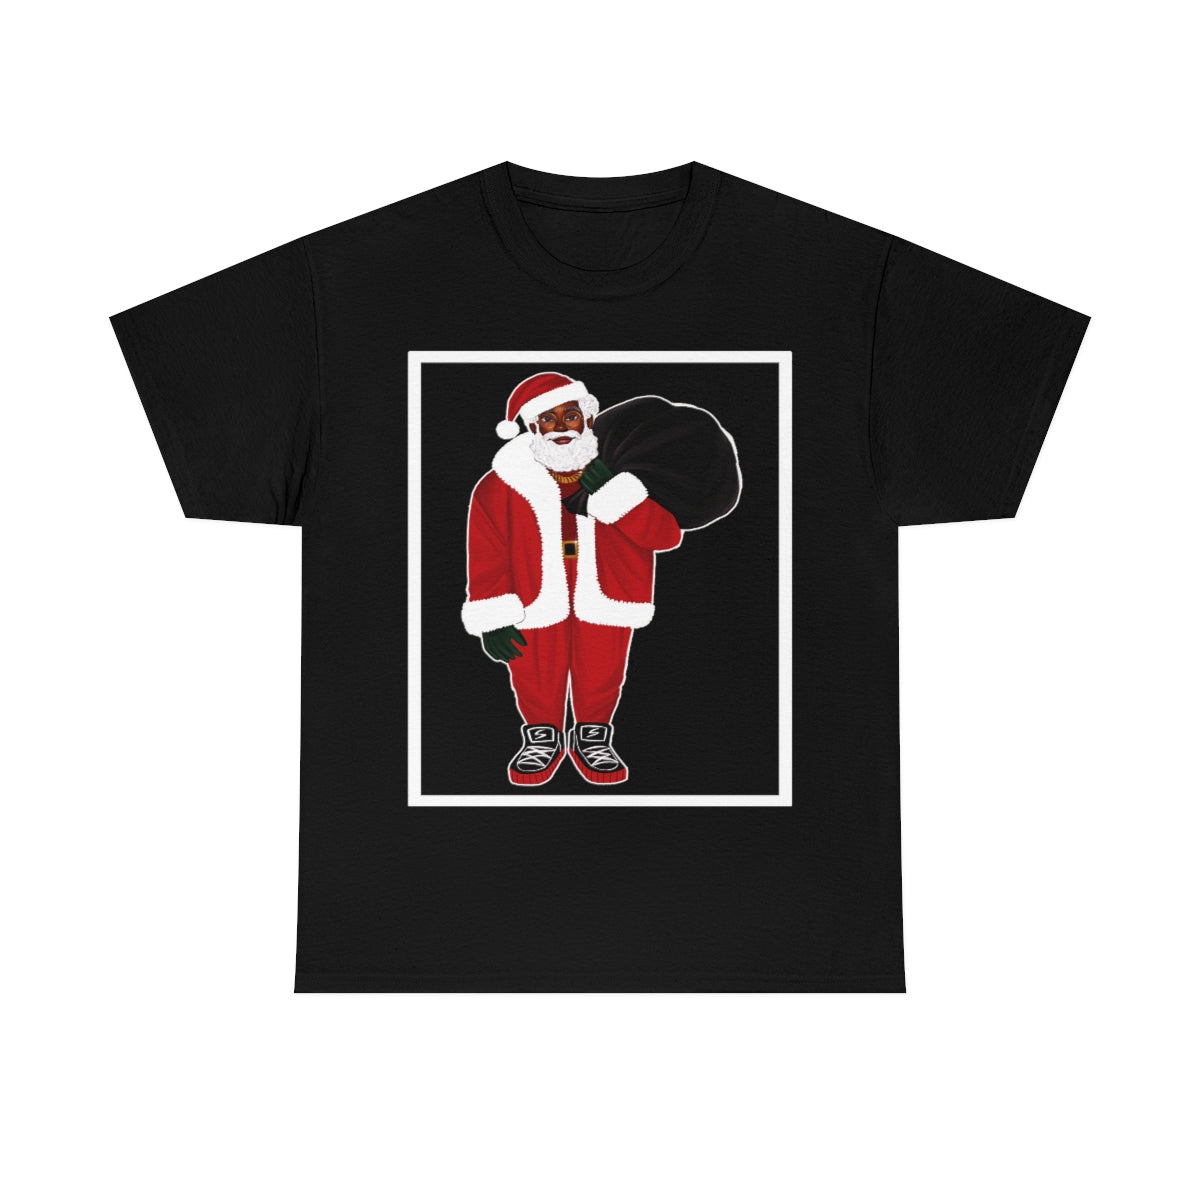 Adult Unisex Ken, The Black Santa Shirt (4XL to 5XL) - Black Friday Deal: Buy One Get One 50% Off